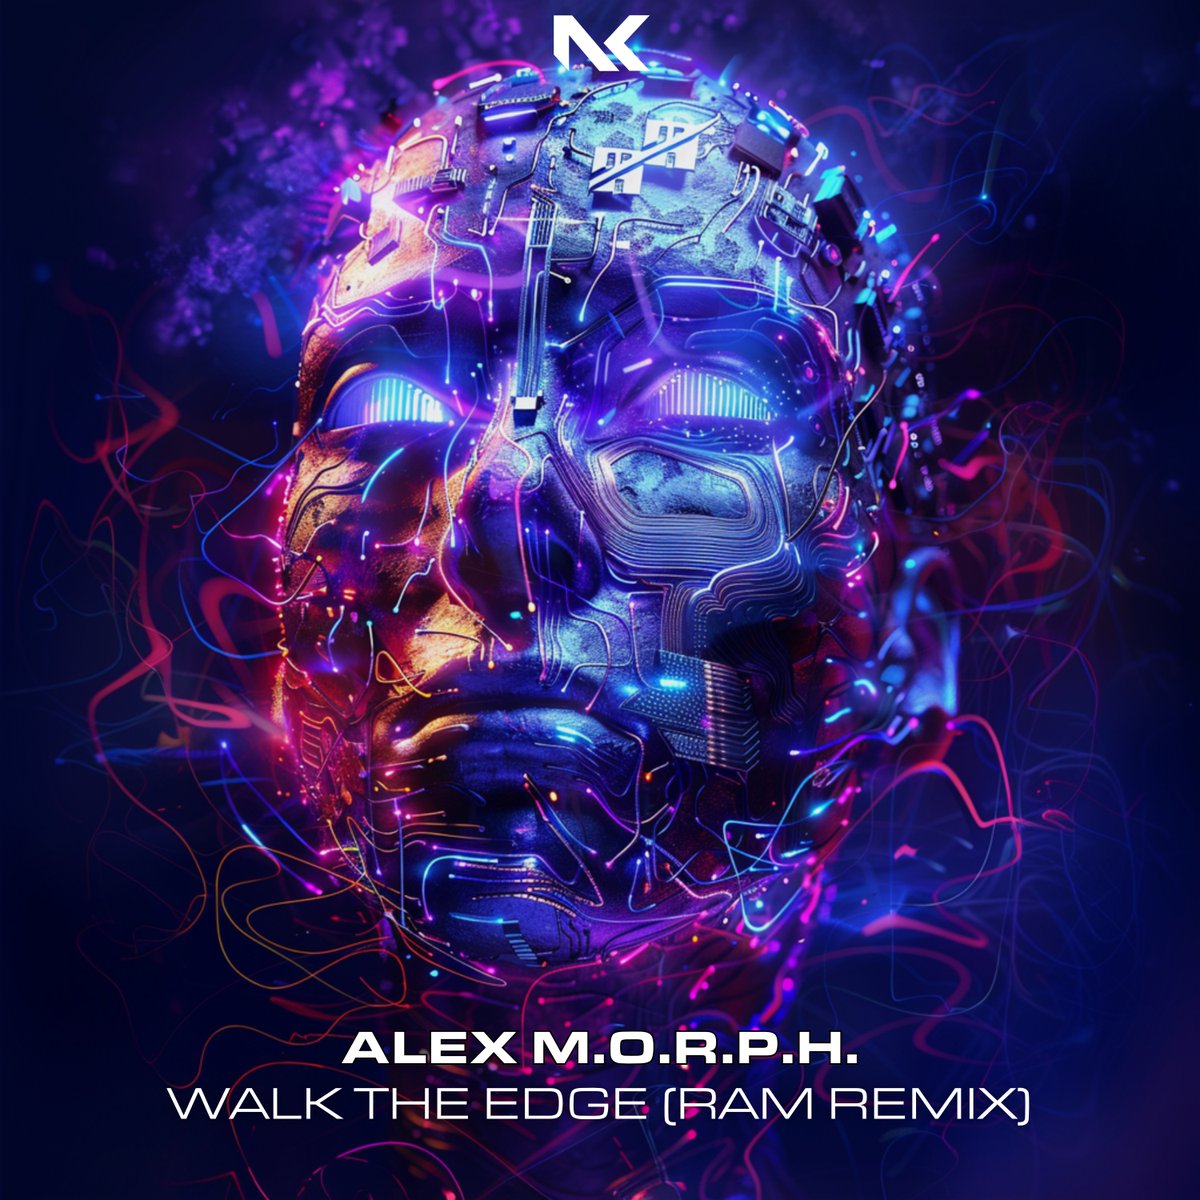 THE ONE YOU ALL BIN WAITING FOR !!! Alex M.O.R.P.H - Walk The Edge (RAM remix) ❤️ It just doesn't get any better than this for a pure trance lover ✅ Want to support this mega beauty. pre save now nk.complete.me/walktheedge